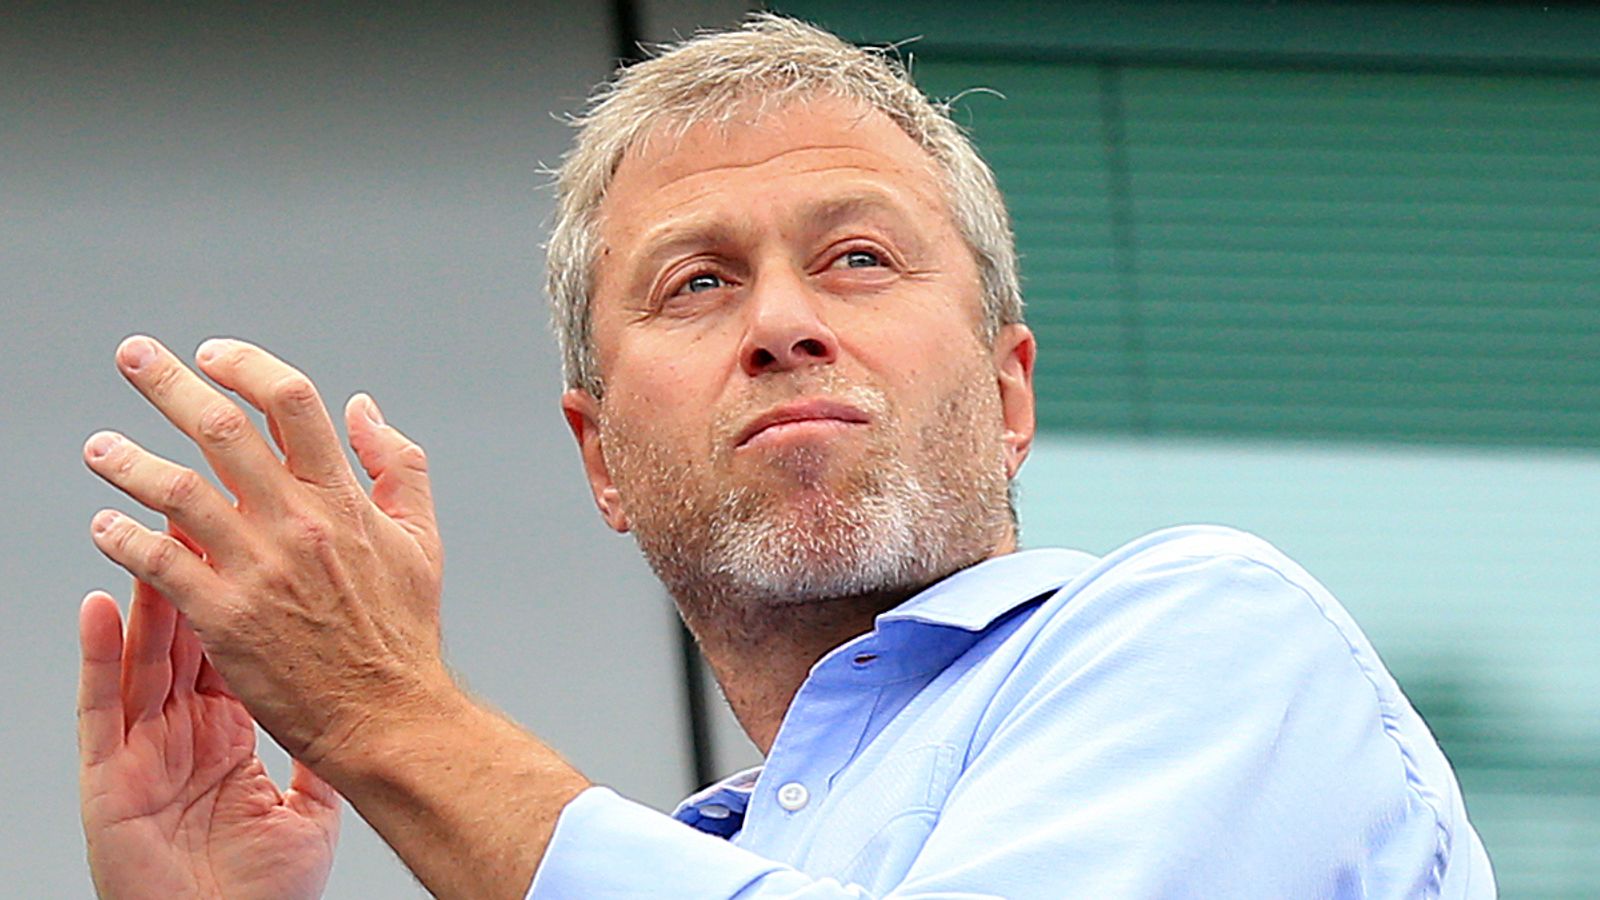 Roman Abramovich: Chelsea owner's assets should be seized, Labour MP tells gover..